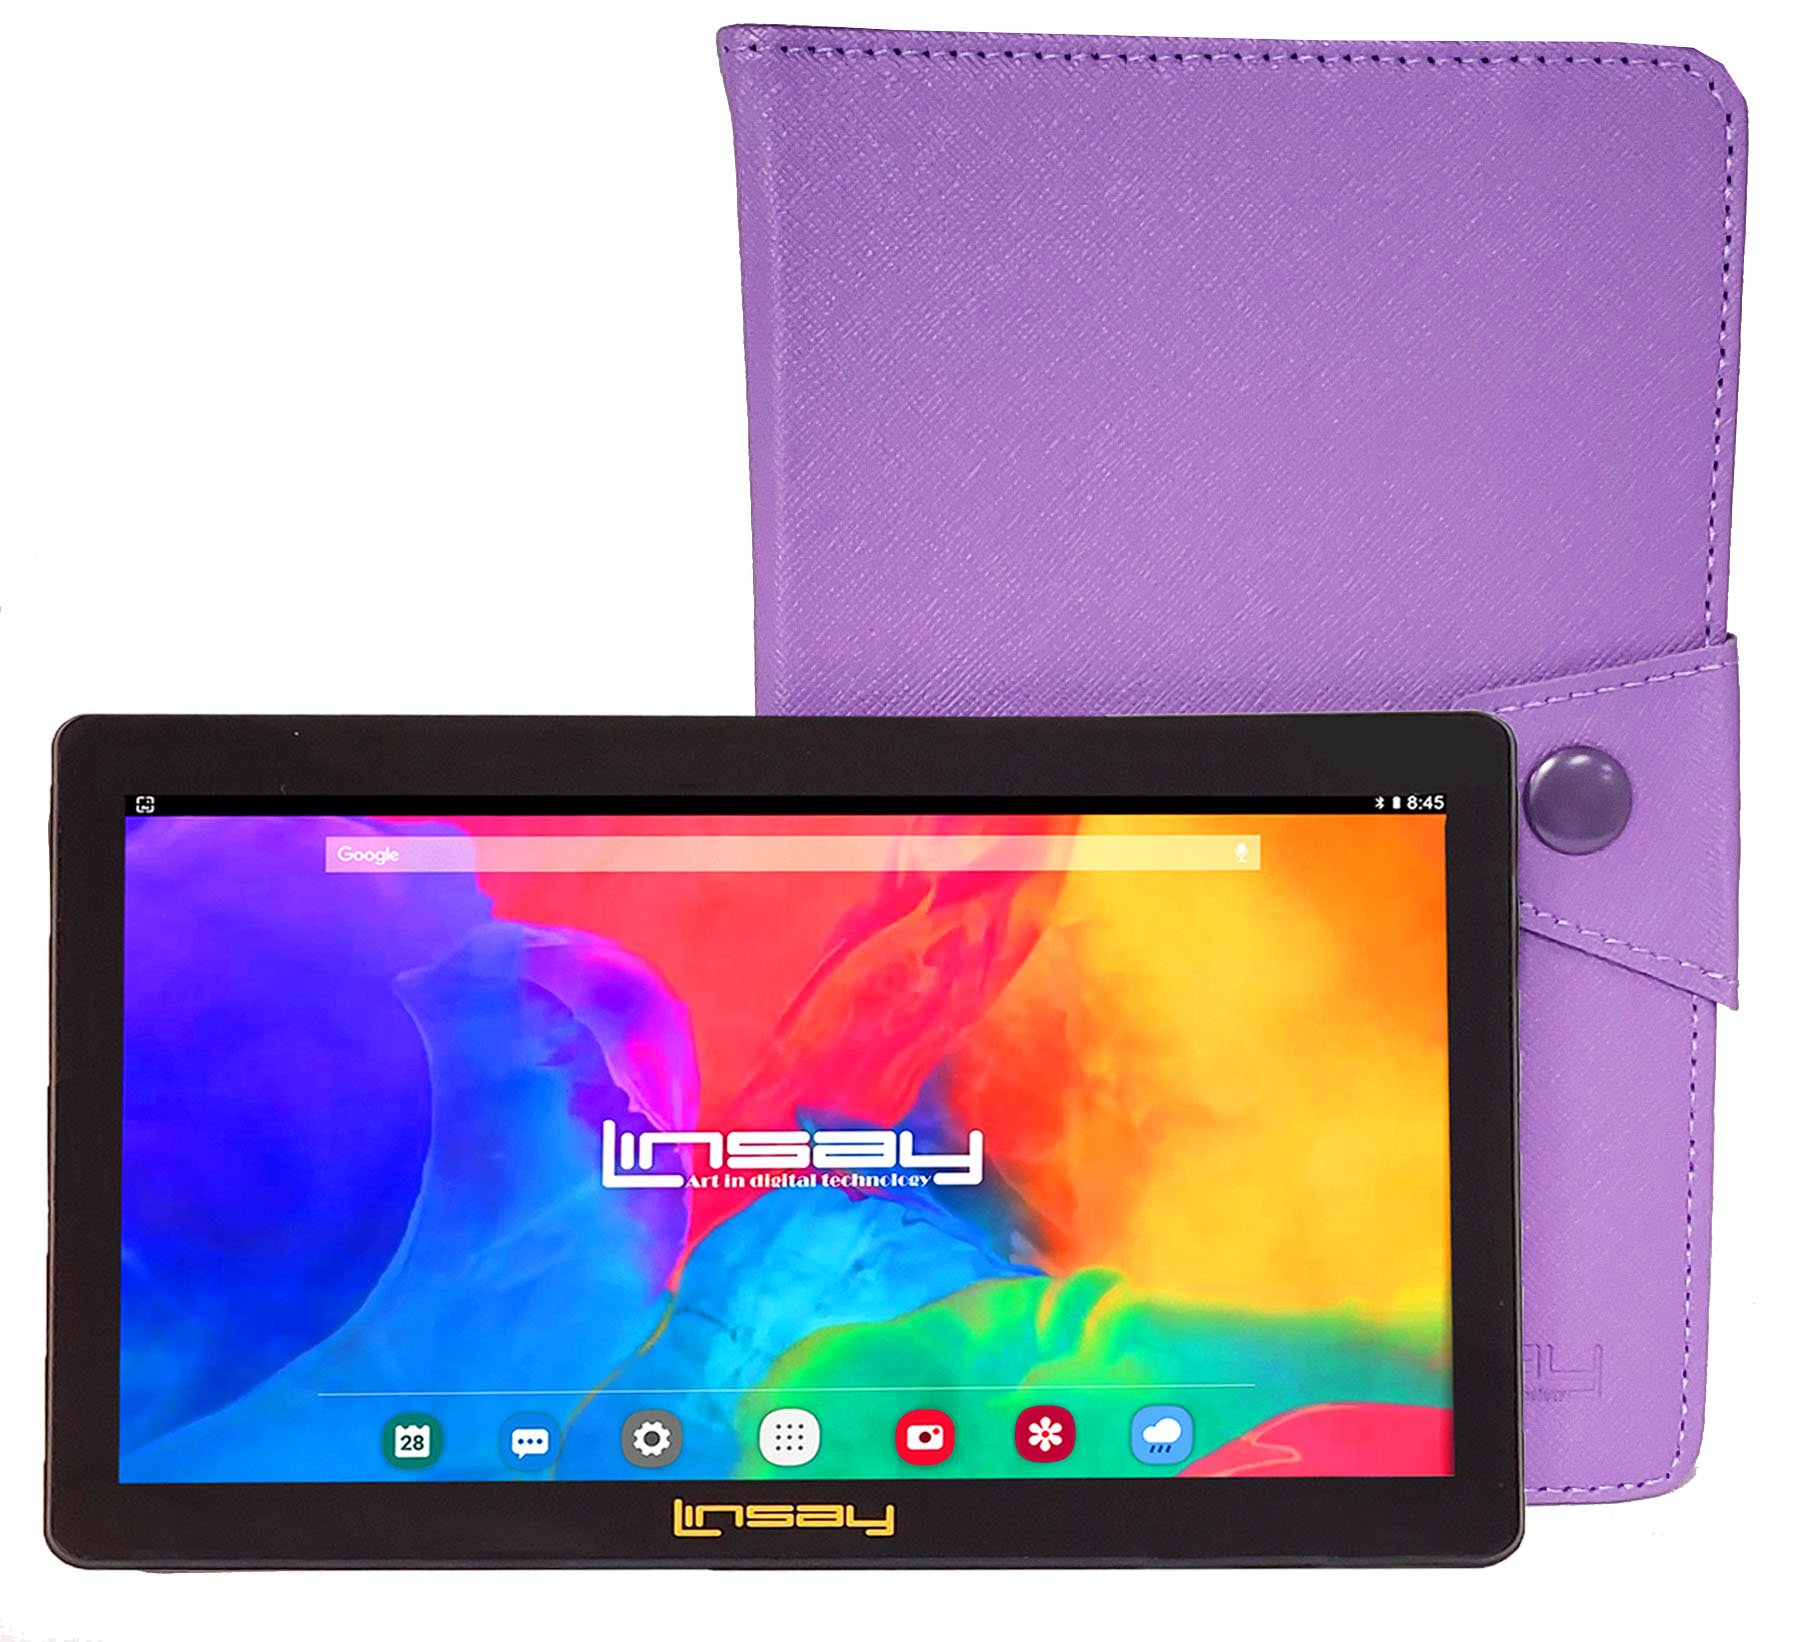 LINSAY 7" Quad Core 2GB RAM 64GB Storage Android 13 WiFi Tablet with Protective Case Purple - image 1 of 6